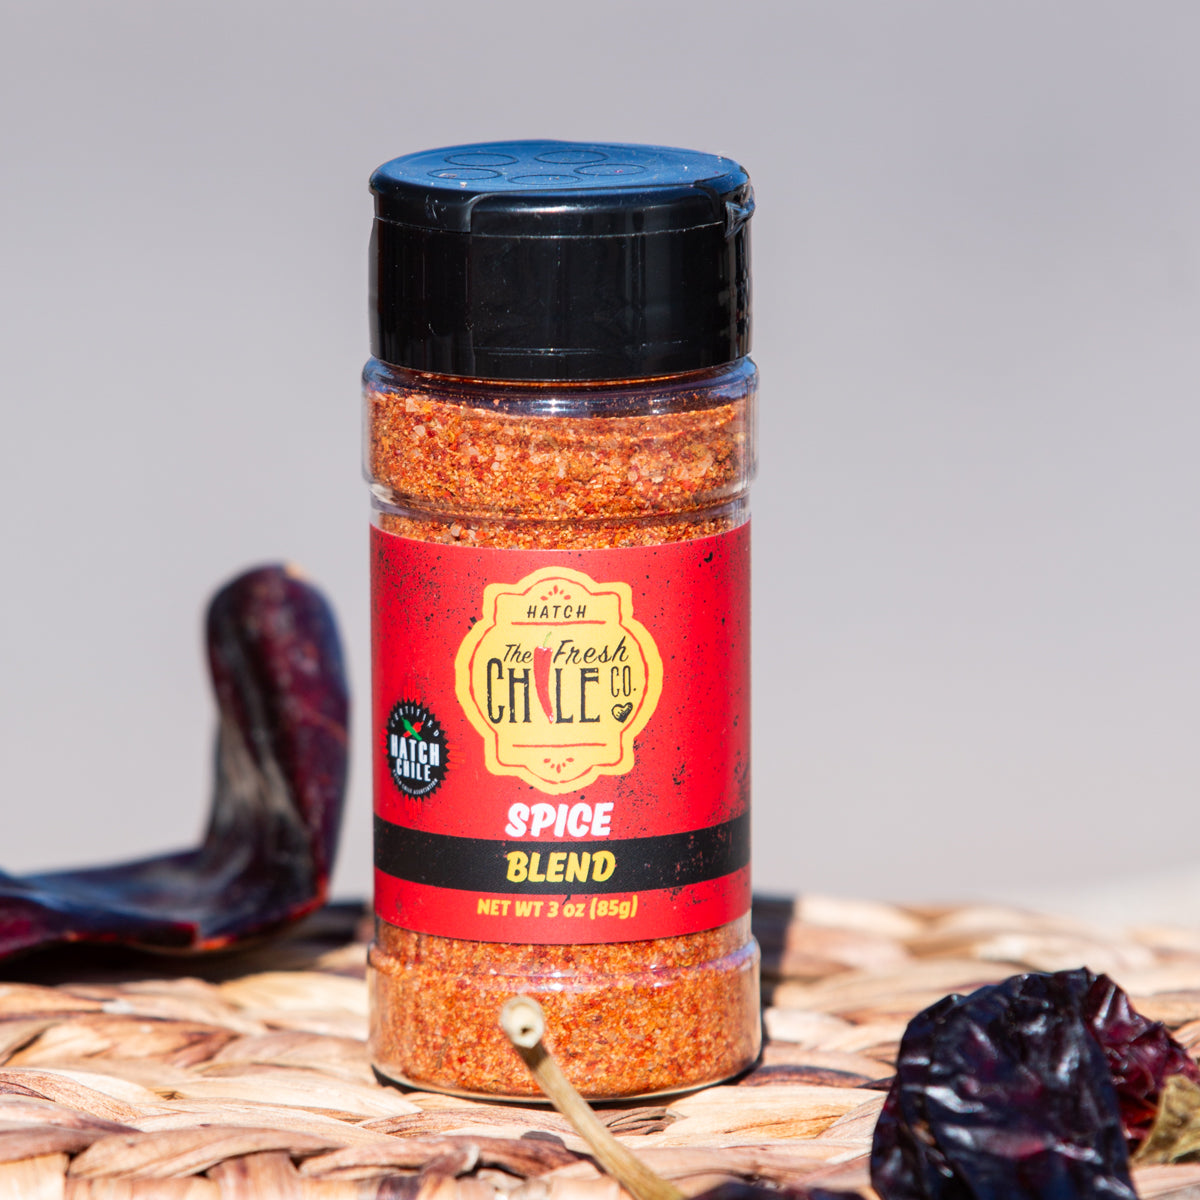 A jar of "the fresh chile co." Hatch Red Chile Spice Blend on a woven mat, with dried red chiles scattered around it. The jar label is vibrant with red and gold colors.